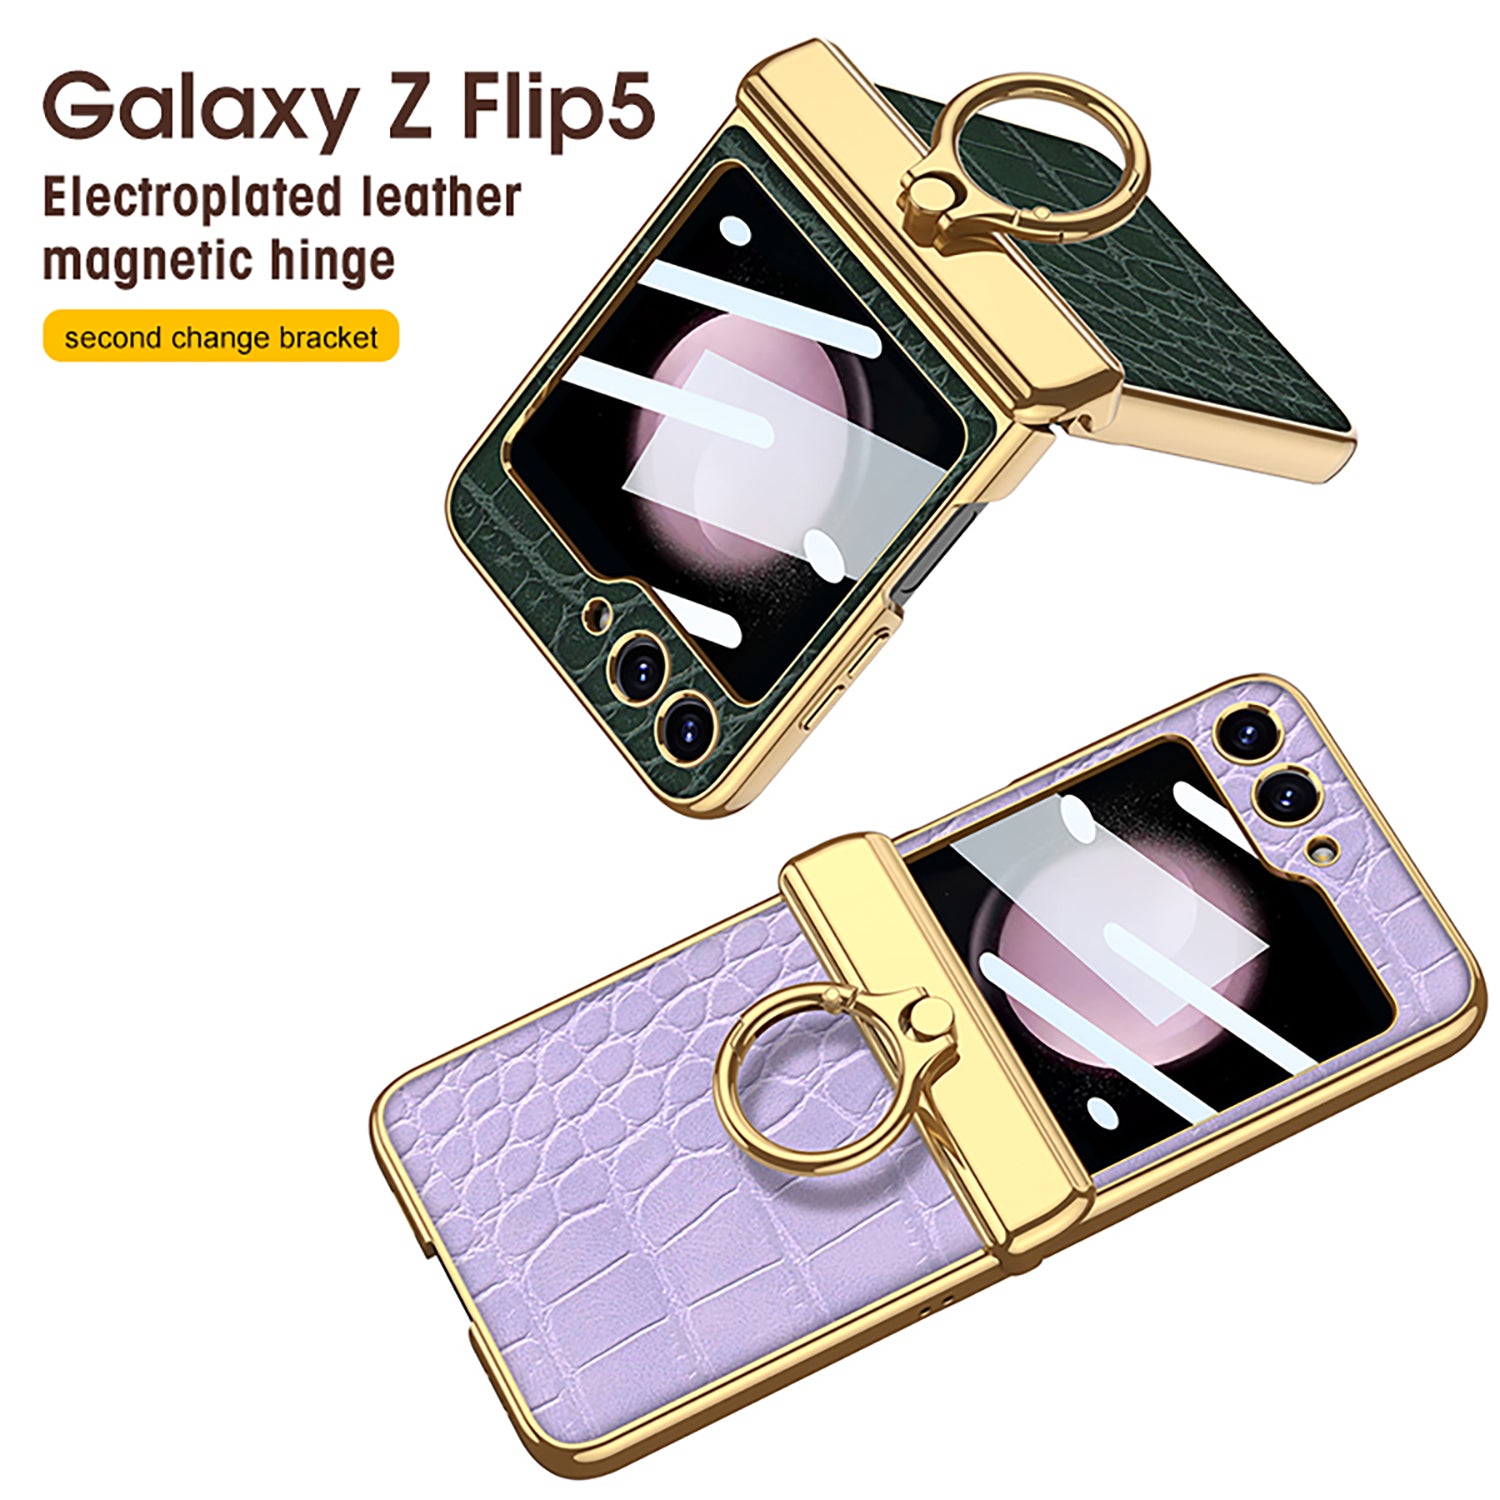 Electroplated Leather Magnetic Hinge Ring Holder Case For Samsung Galaxy Z Flip5 Flip4 Flip3 With Front Protection Film - Mycasety Mycasety